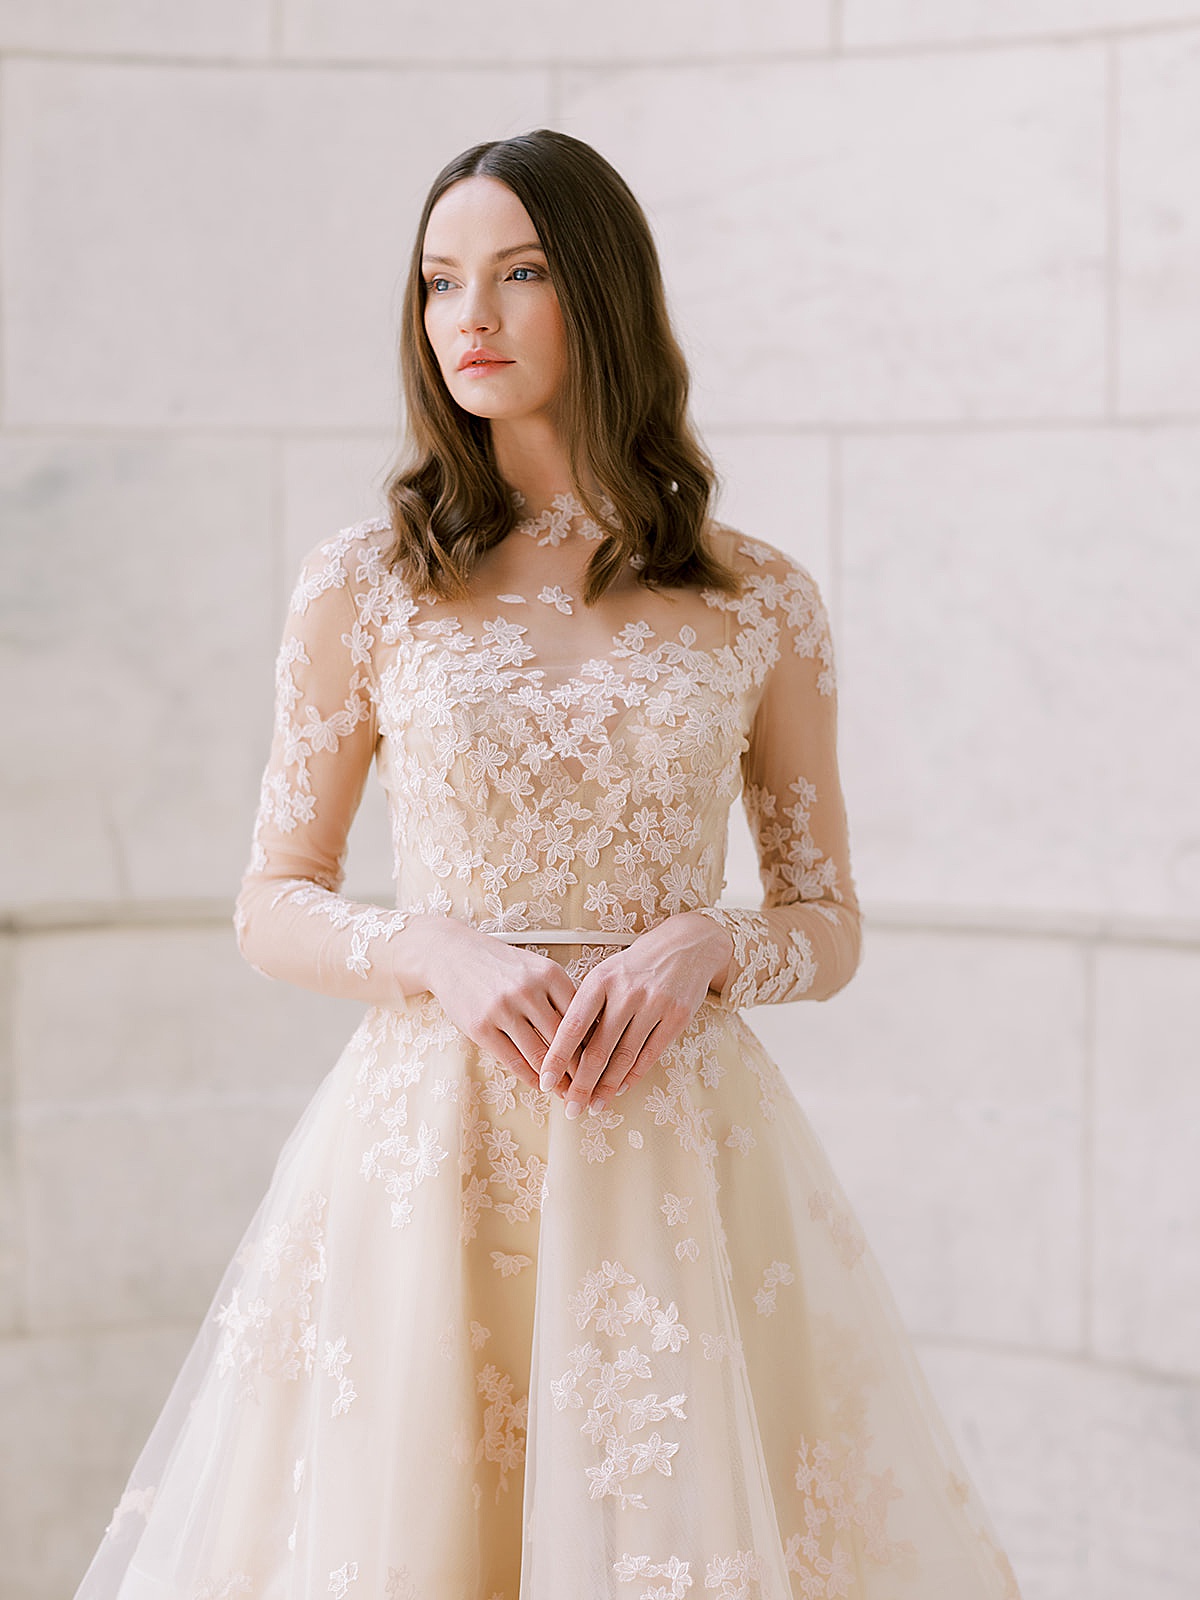 woman in cream lace wedding dress with long net sleeves poses for NYC Fashion Photographer